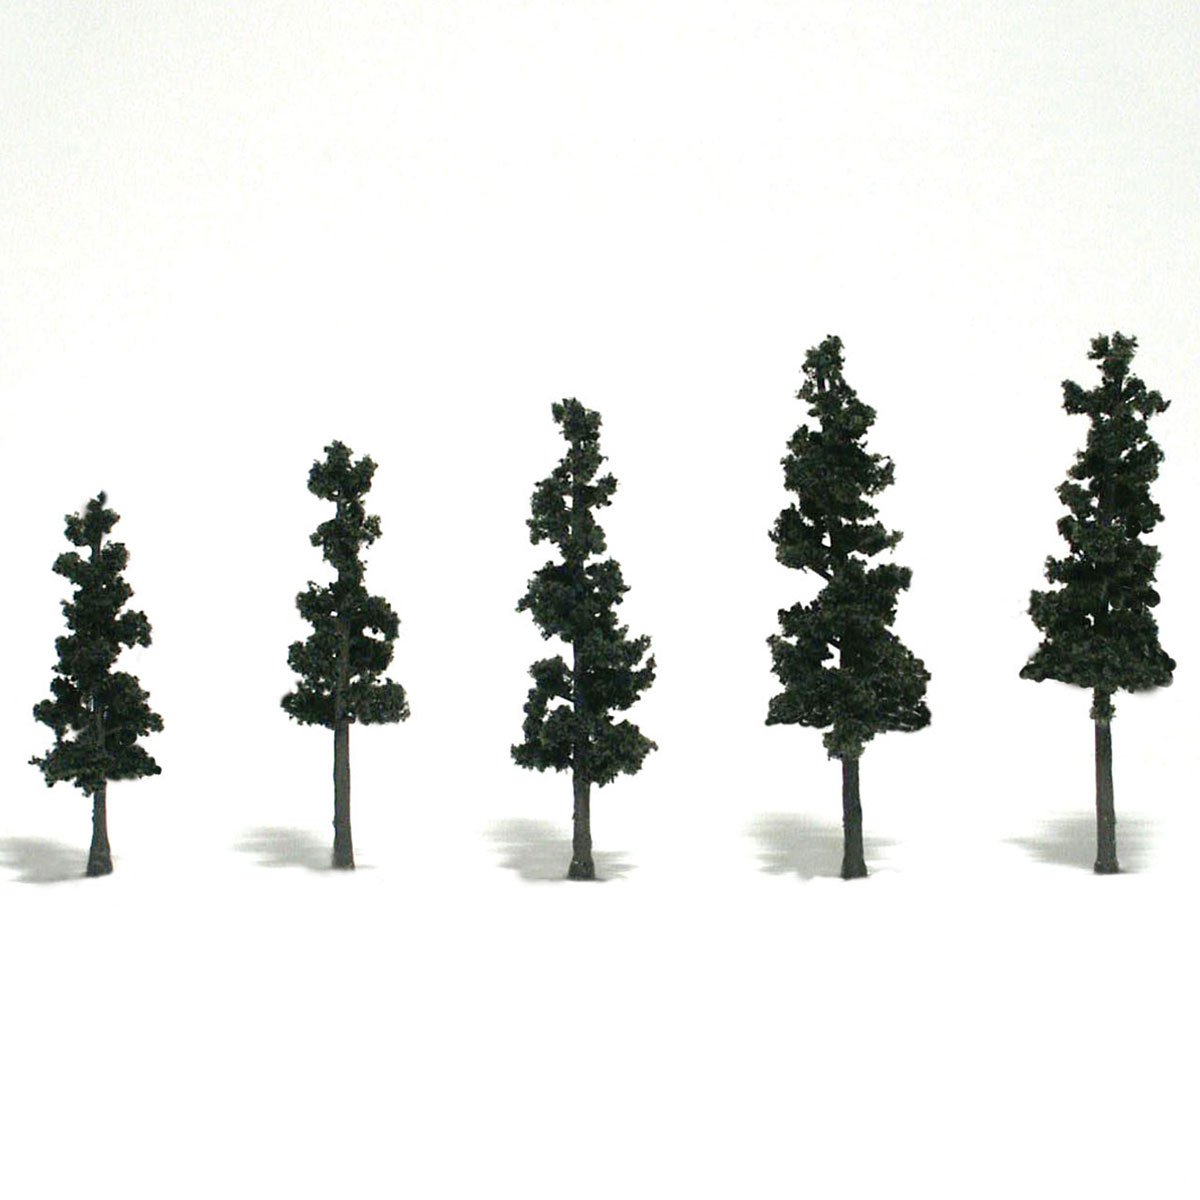 Woodland Scenics: Ready Made Realistic Trees: Conifer Green- 5 Trees (2 1/2" - 4") 